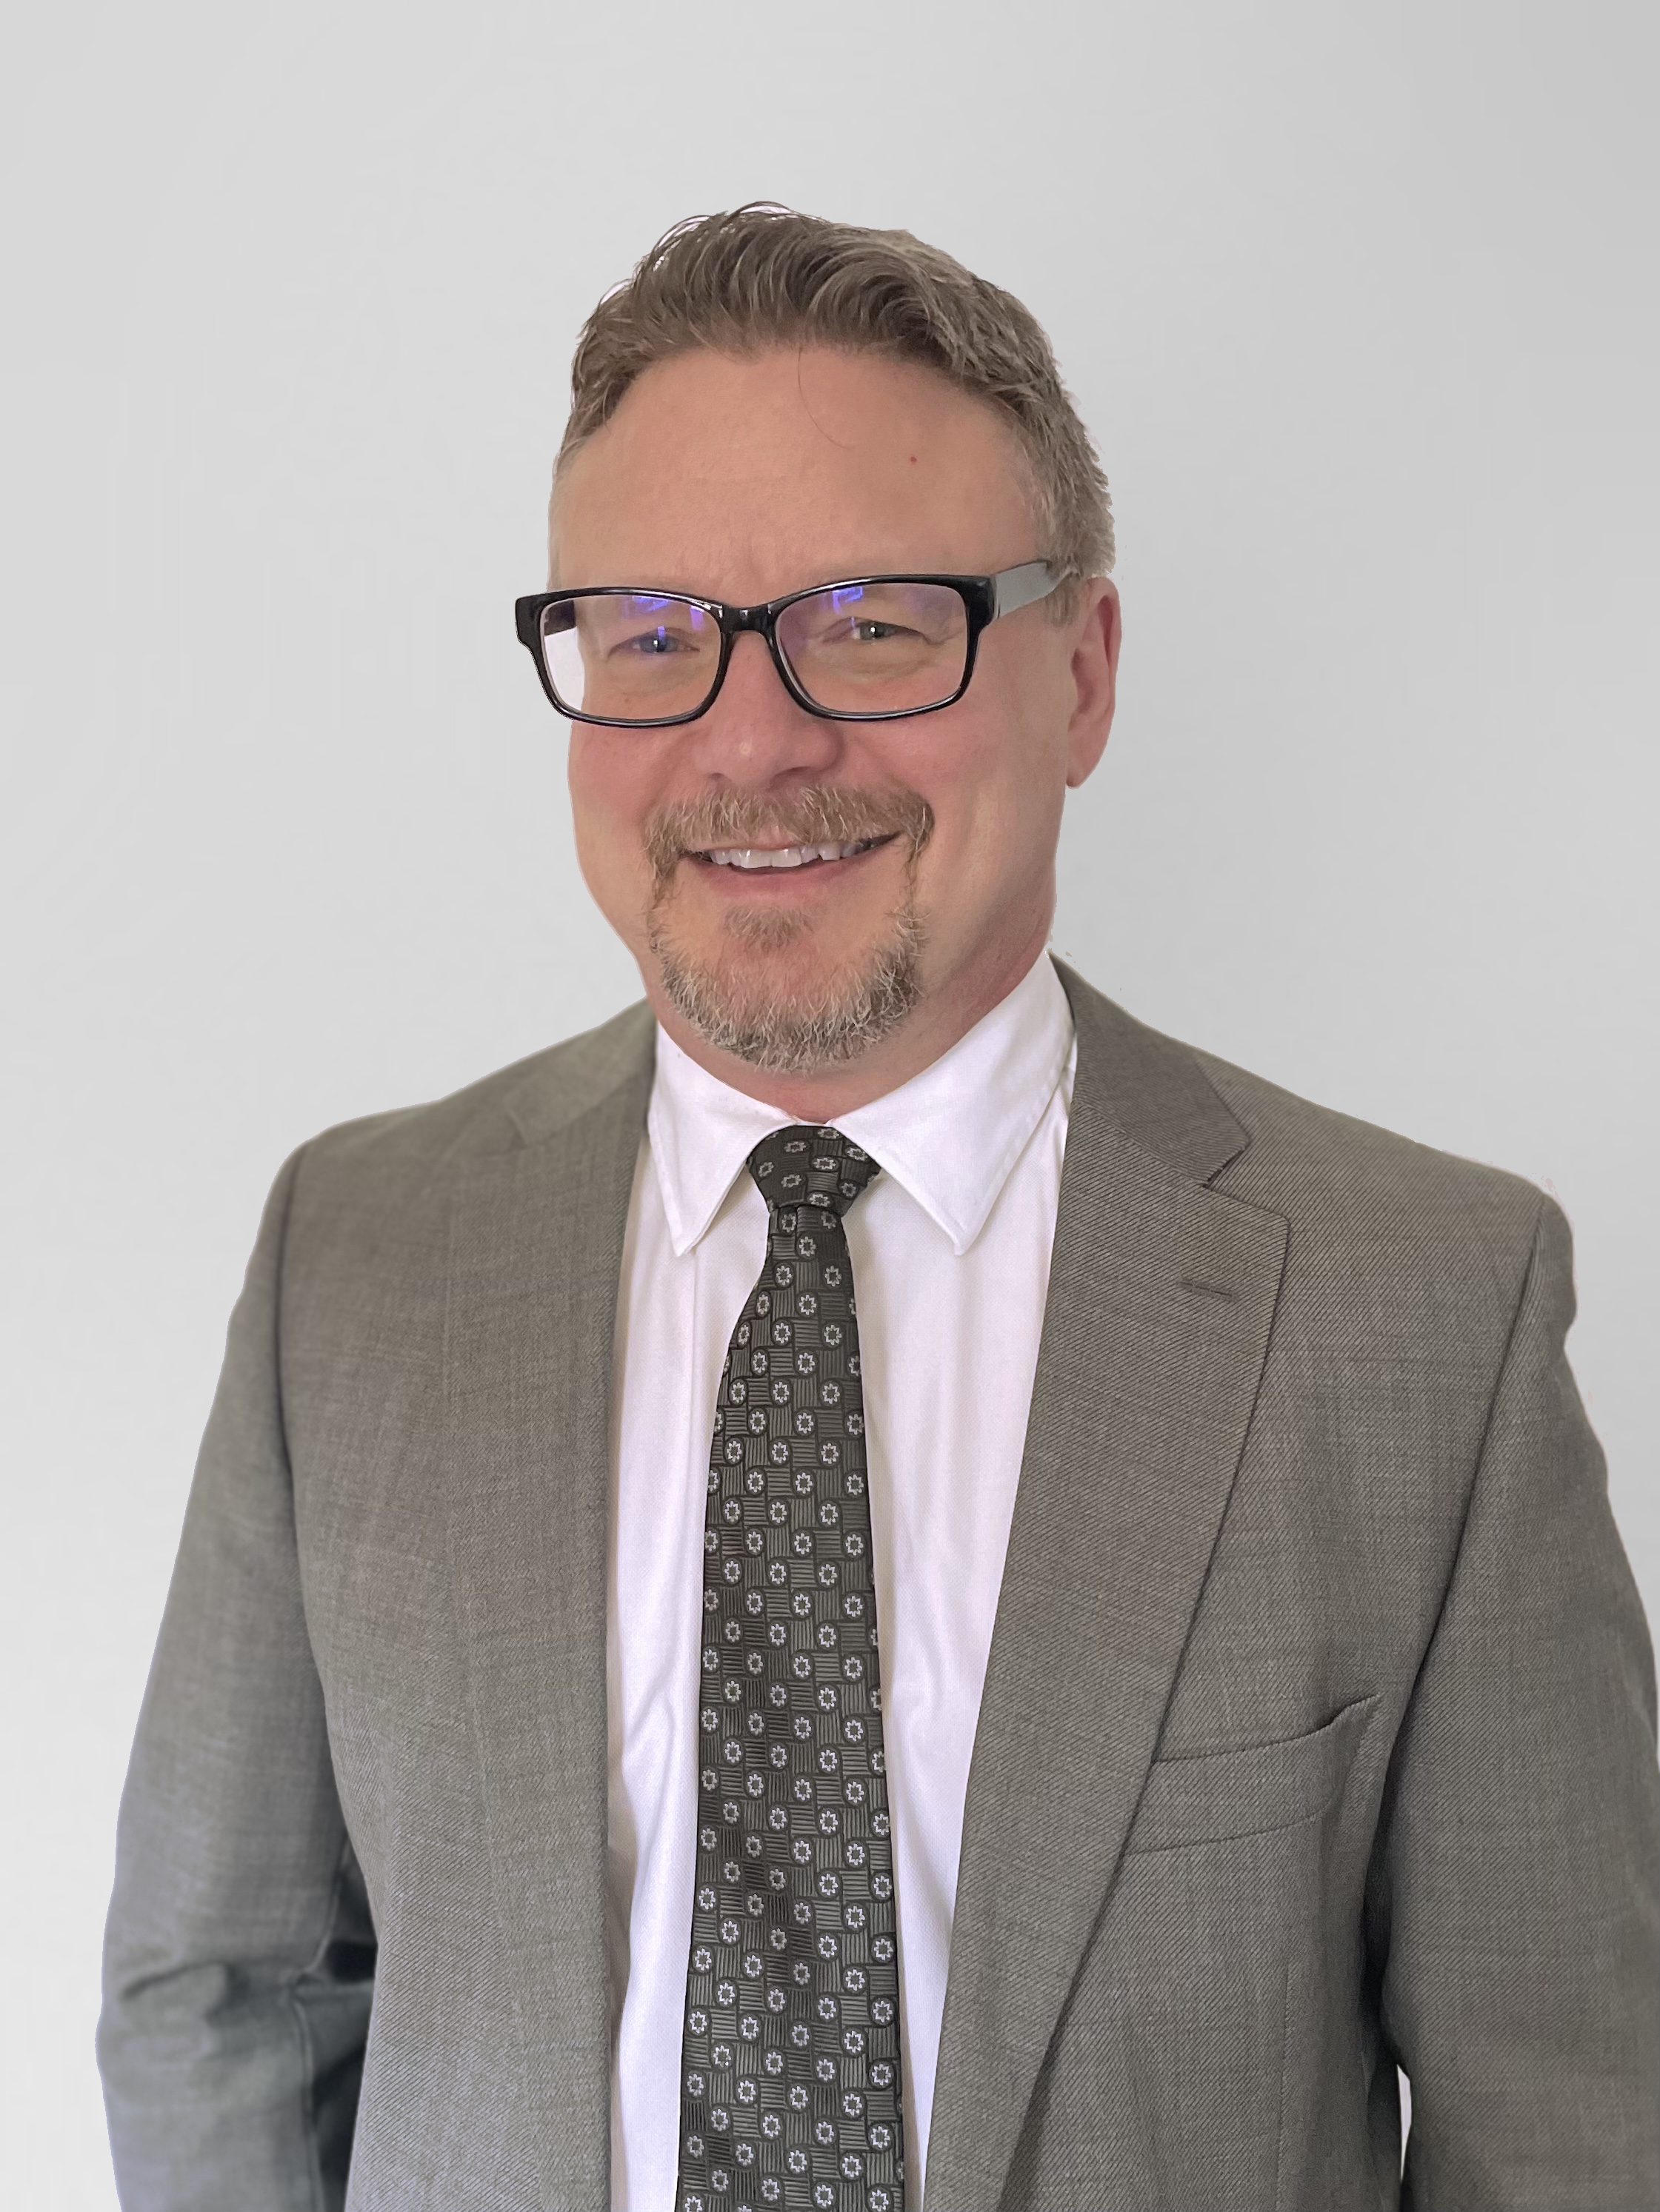 Calgary litigation lawyer Tim Froese